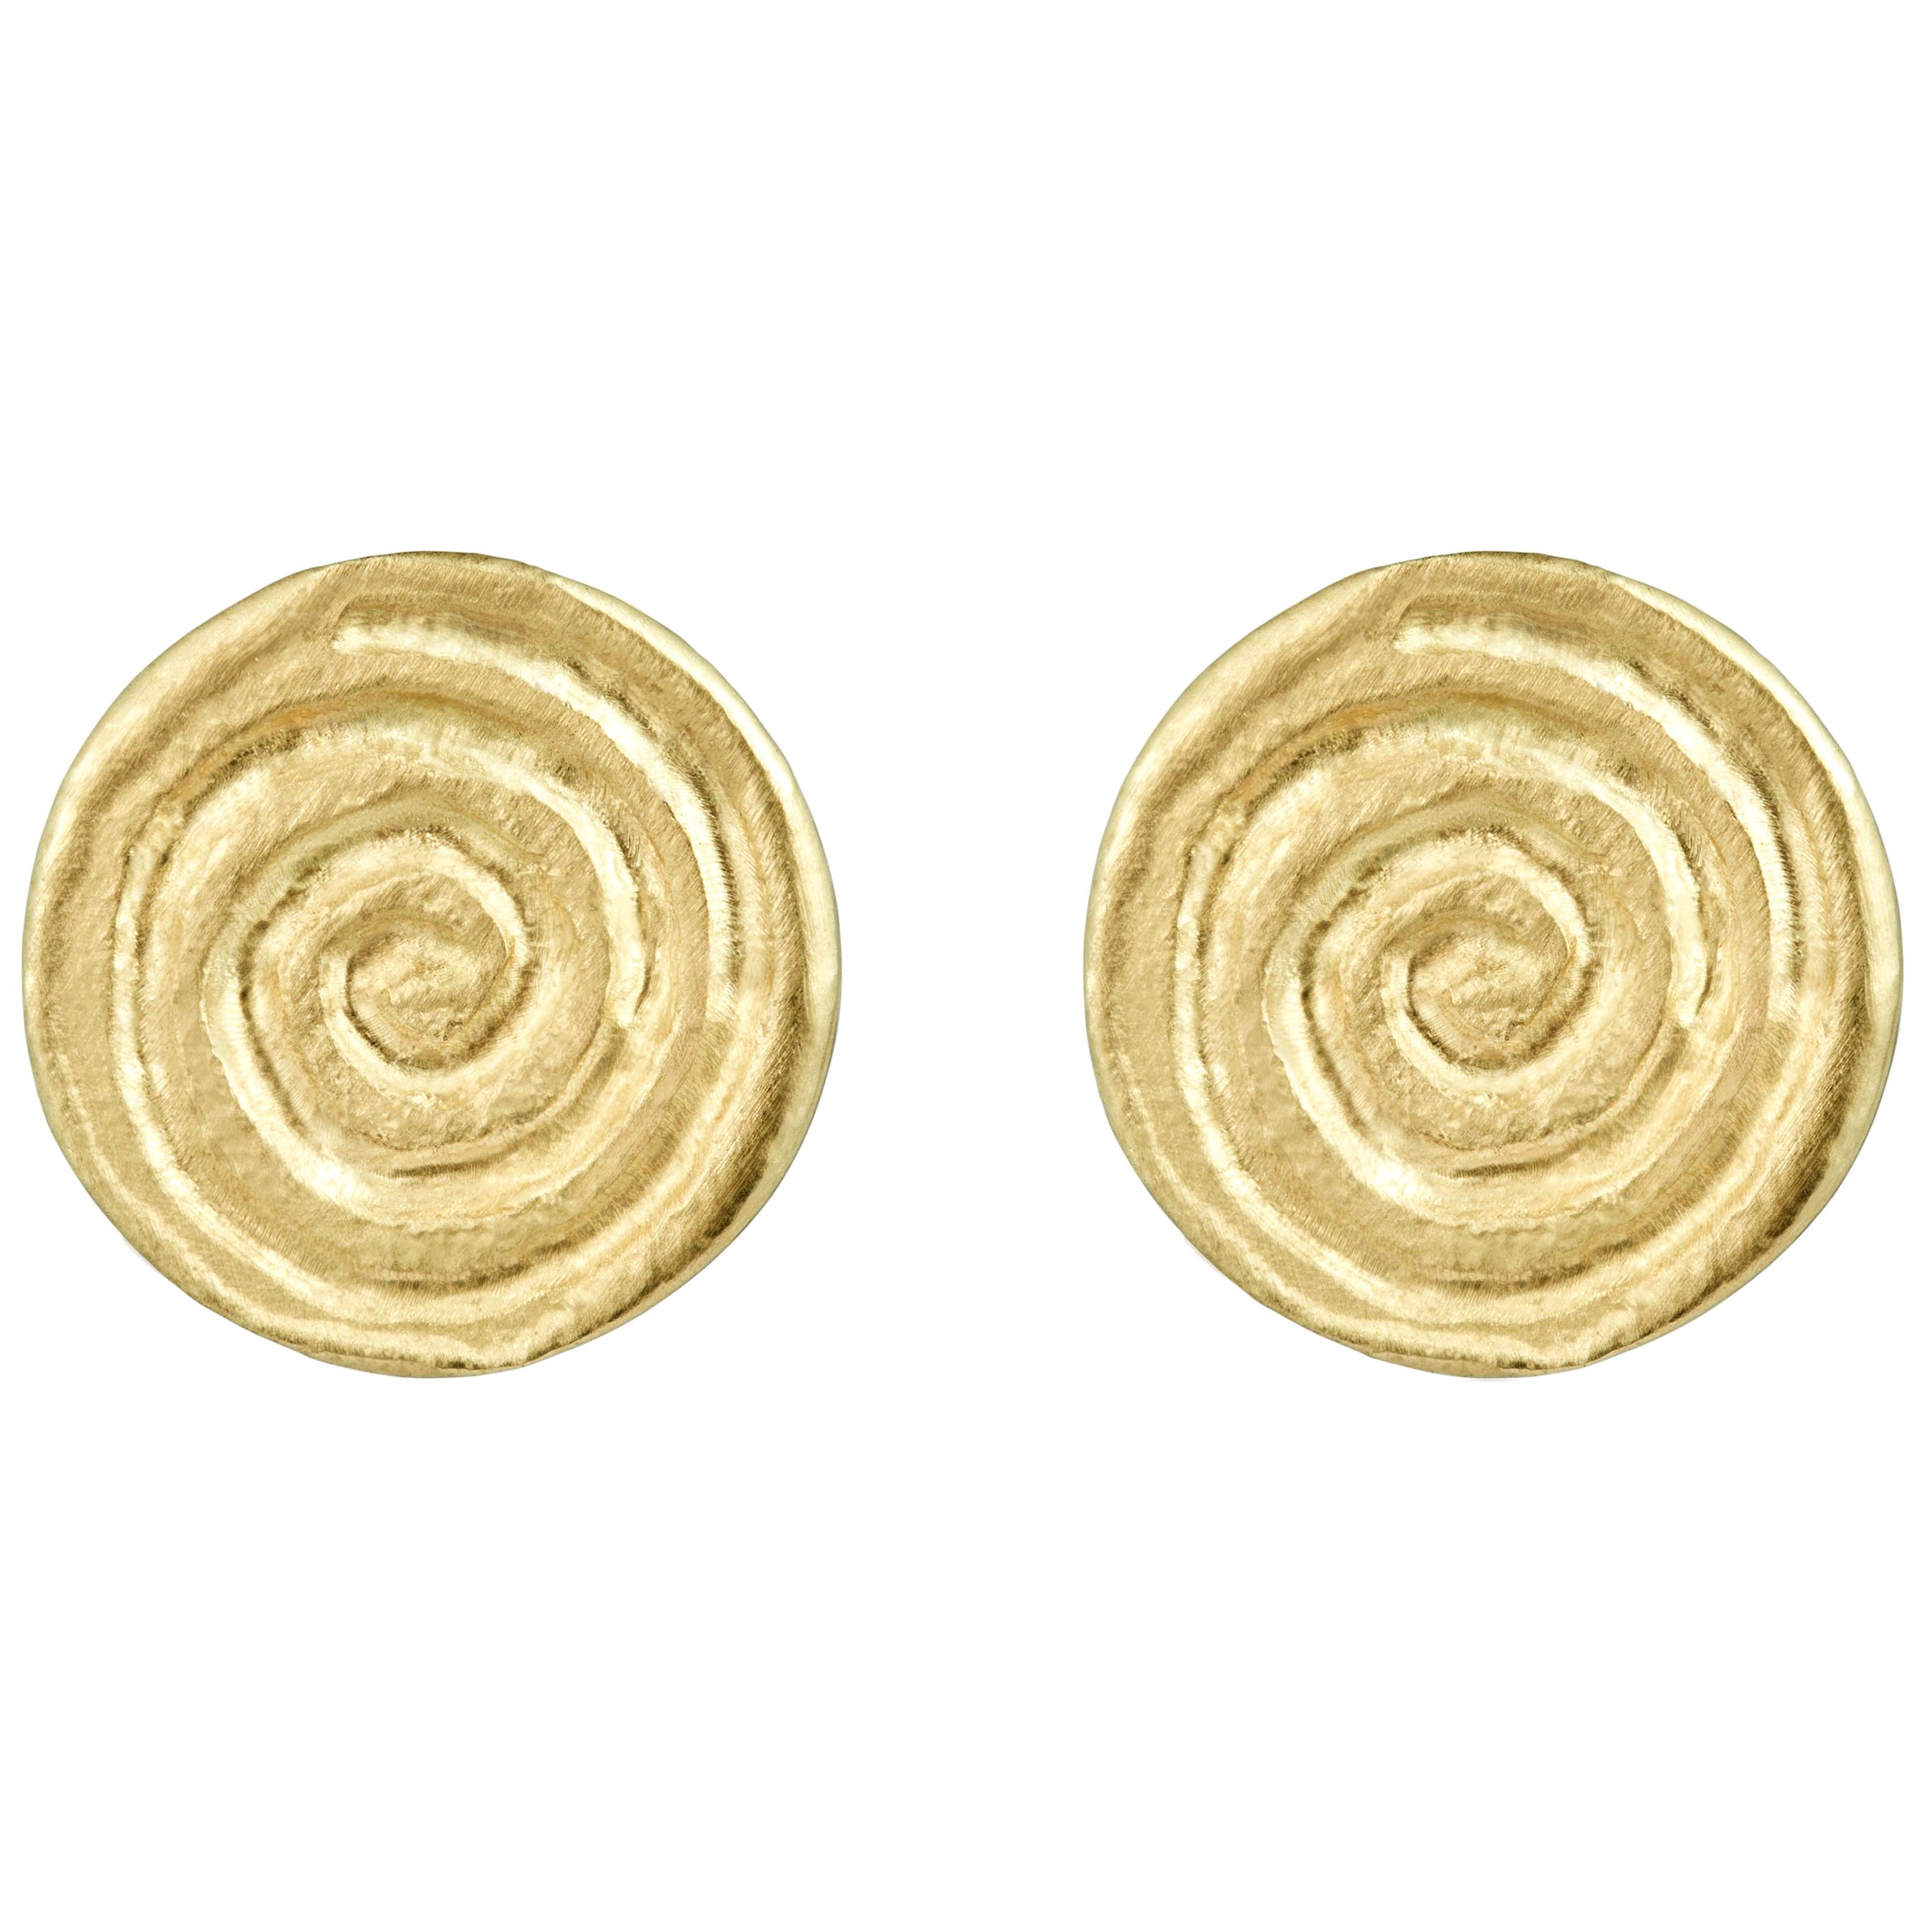 A sophisticated pair of 18 karat yellow gold stud earrings, hand-engraved with the symbol of infinity and life with additional drop attachments for a more dressed up look. These unique statement earrings are perfect for weddings & special